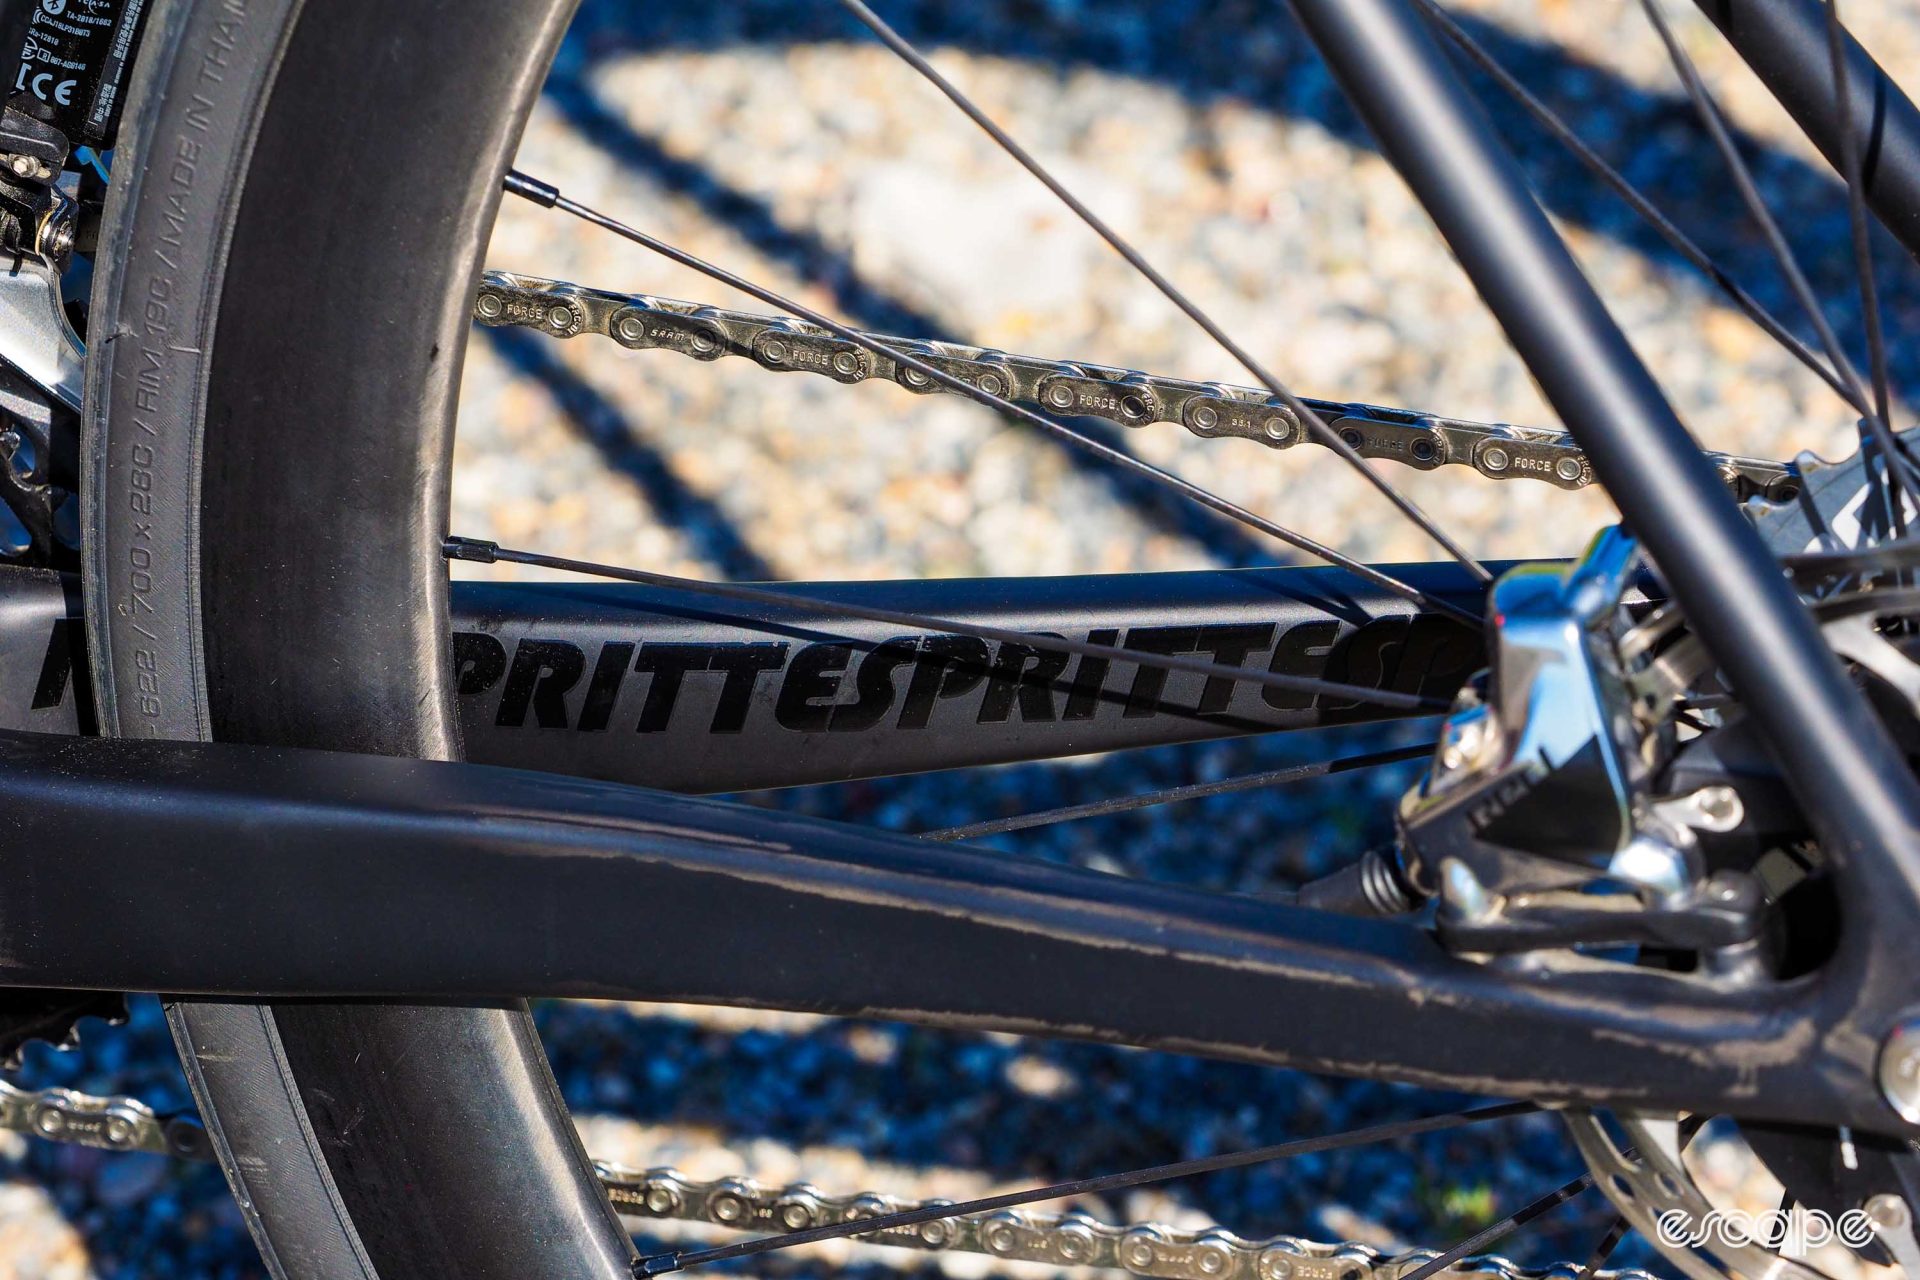 Ritte Esprit chainstay graphics